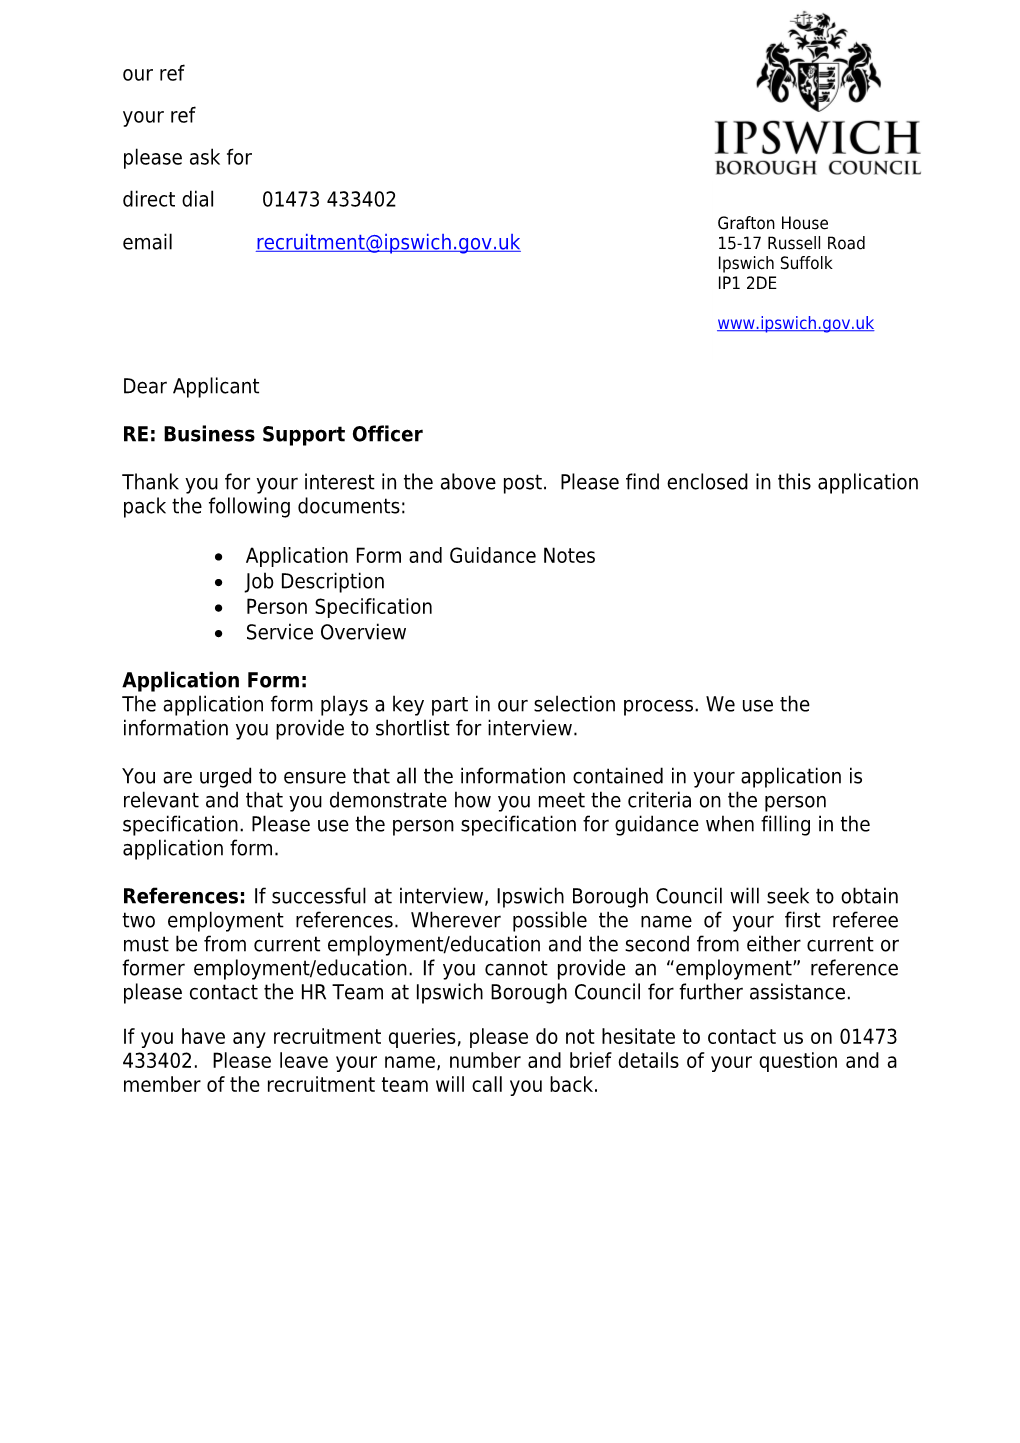 RE: Business Support Officer